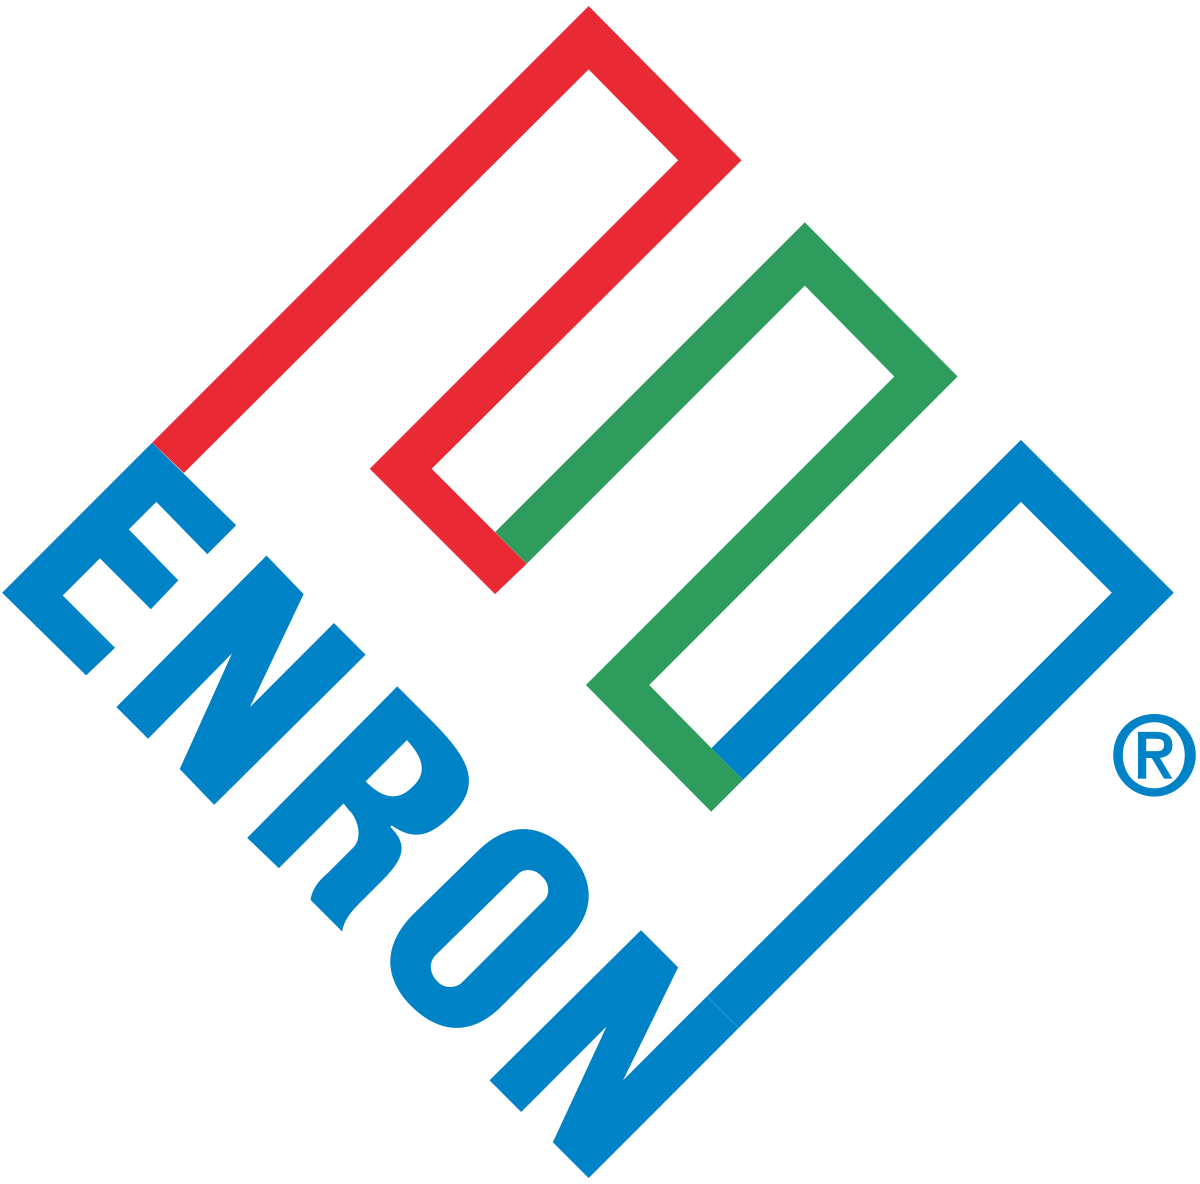 ethical issues in enron the smartest guys in the room